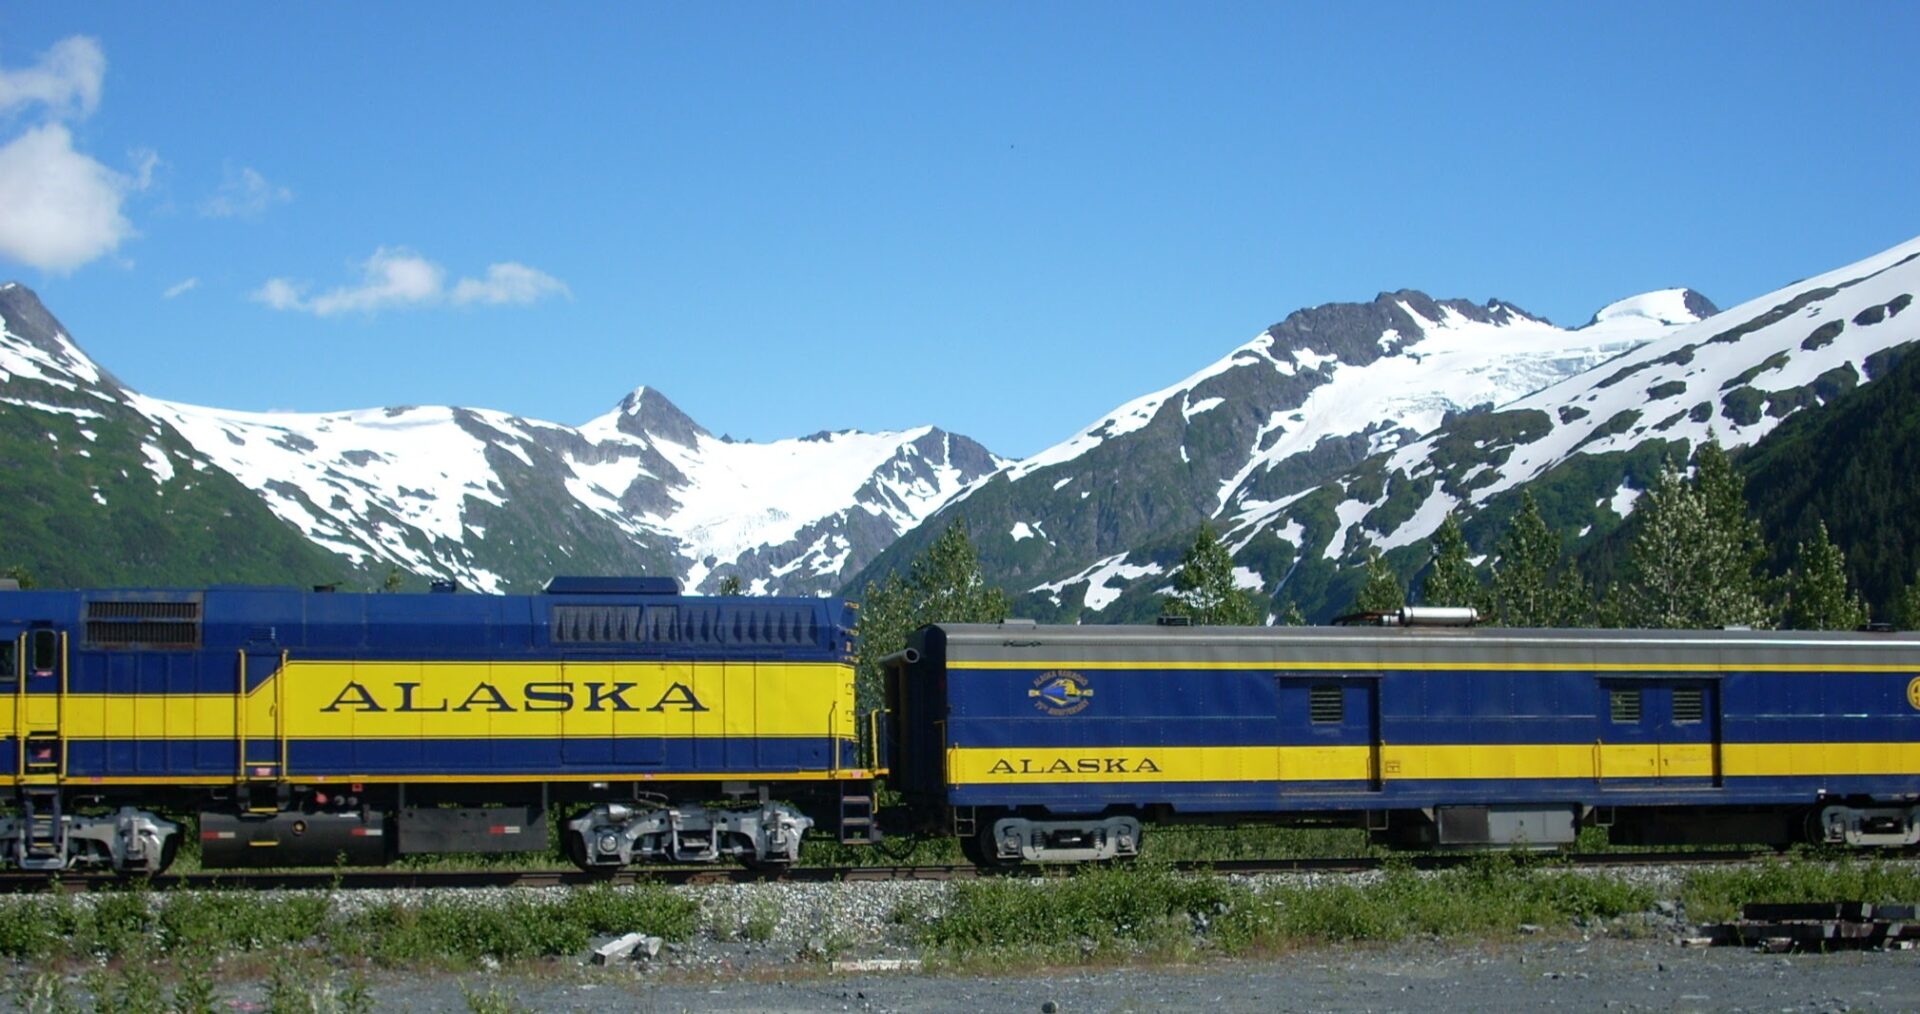 An engine and baggage car for the Alaska Railroad, an Alaska itinerary without a car. In the background are glacier covered mountains against a blue sky